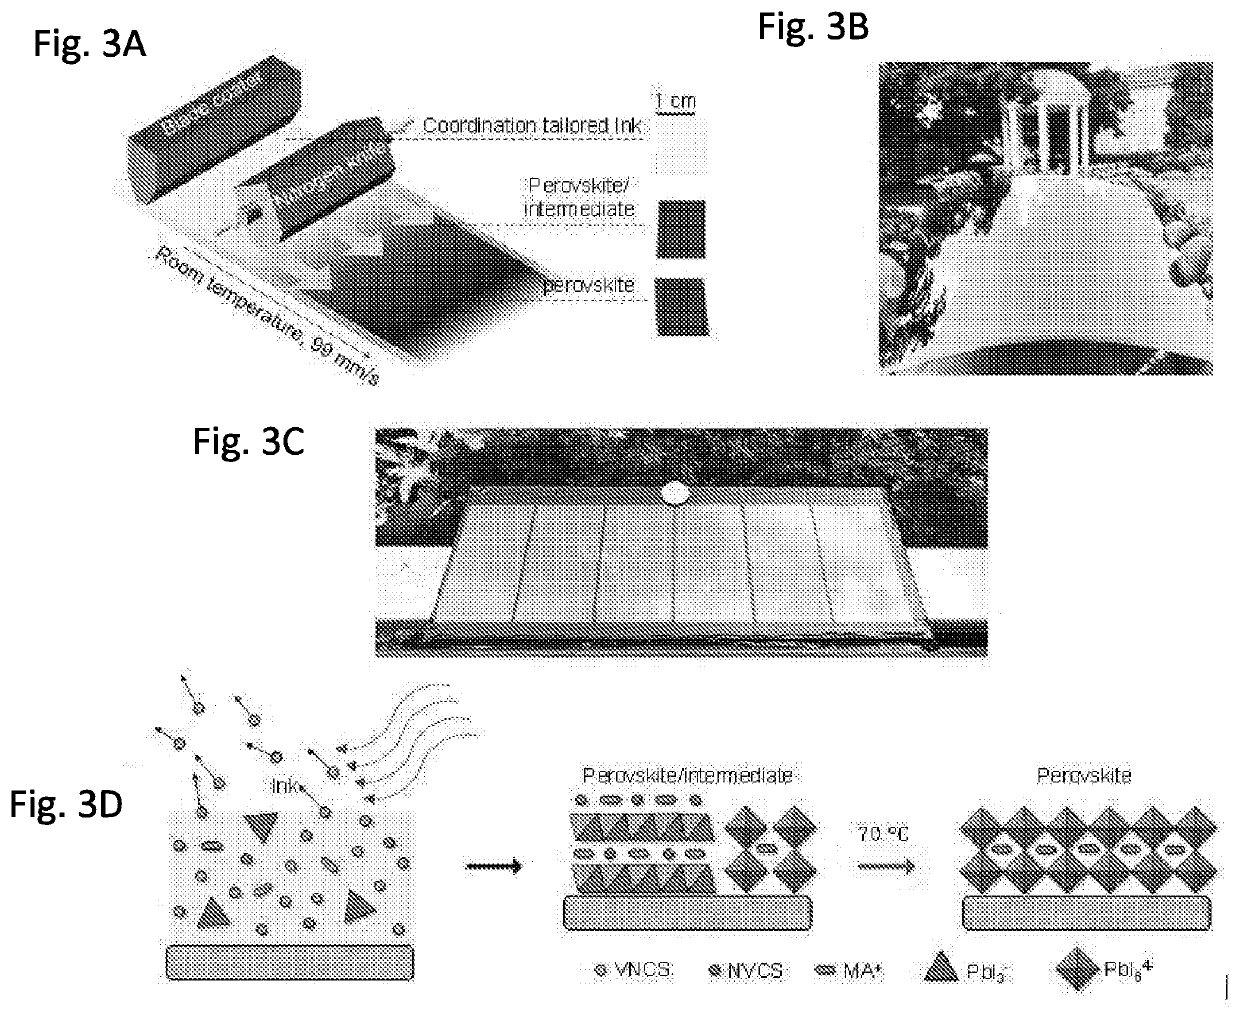 Perovskite compositions comprising mixed solvent systems